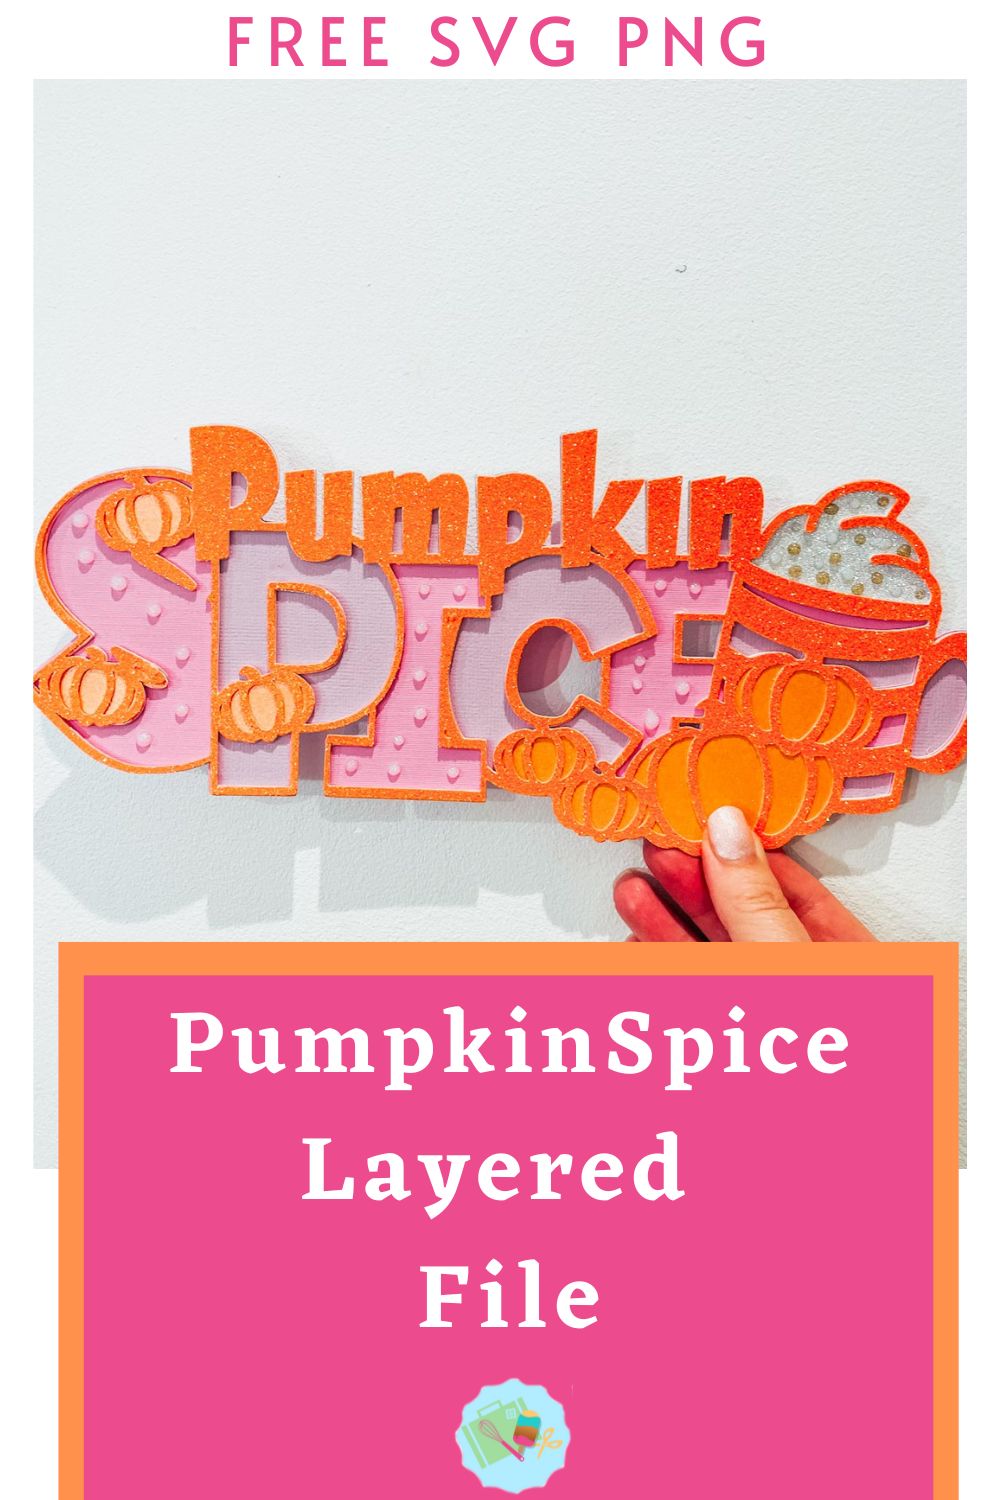 Free Pumpkin Spice SVG, PNG for Cricut, Glowforge and Silhouette